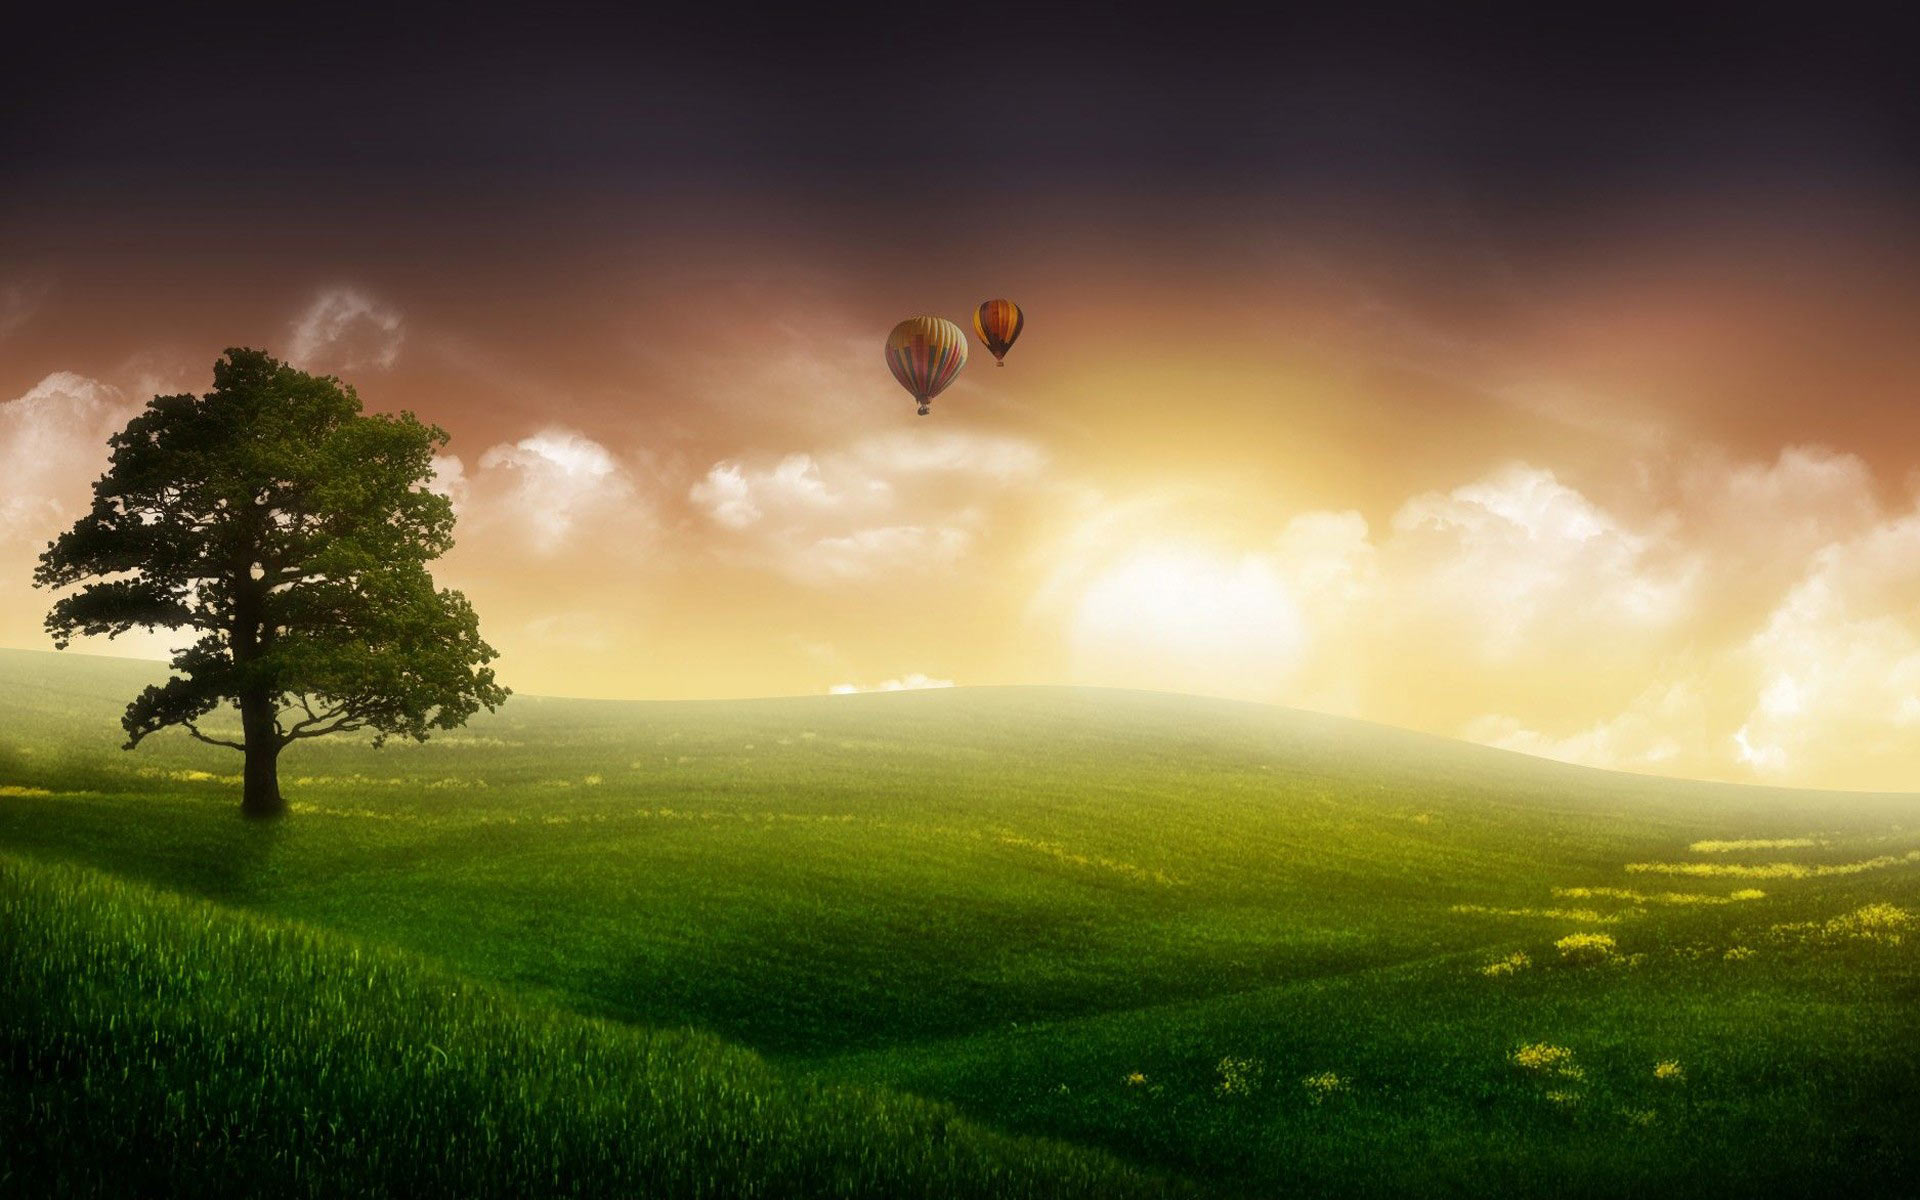 Hot air balloons background